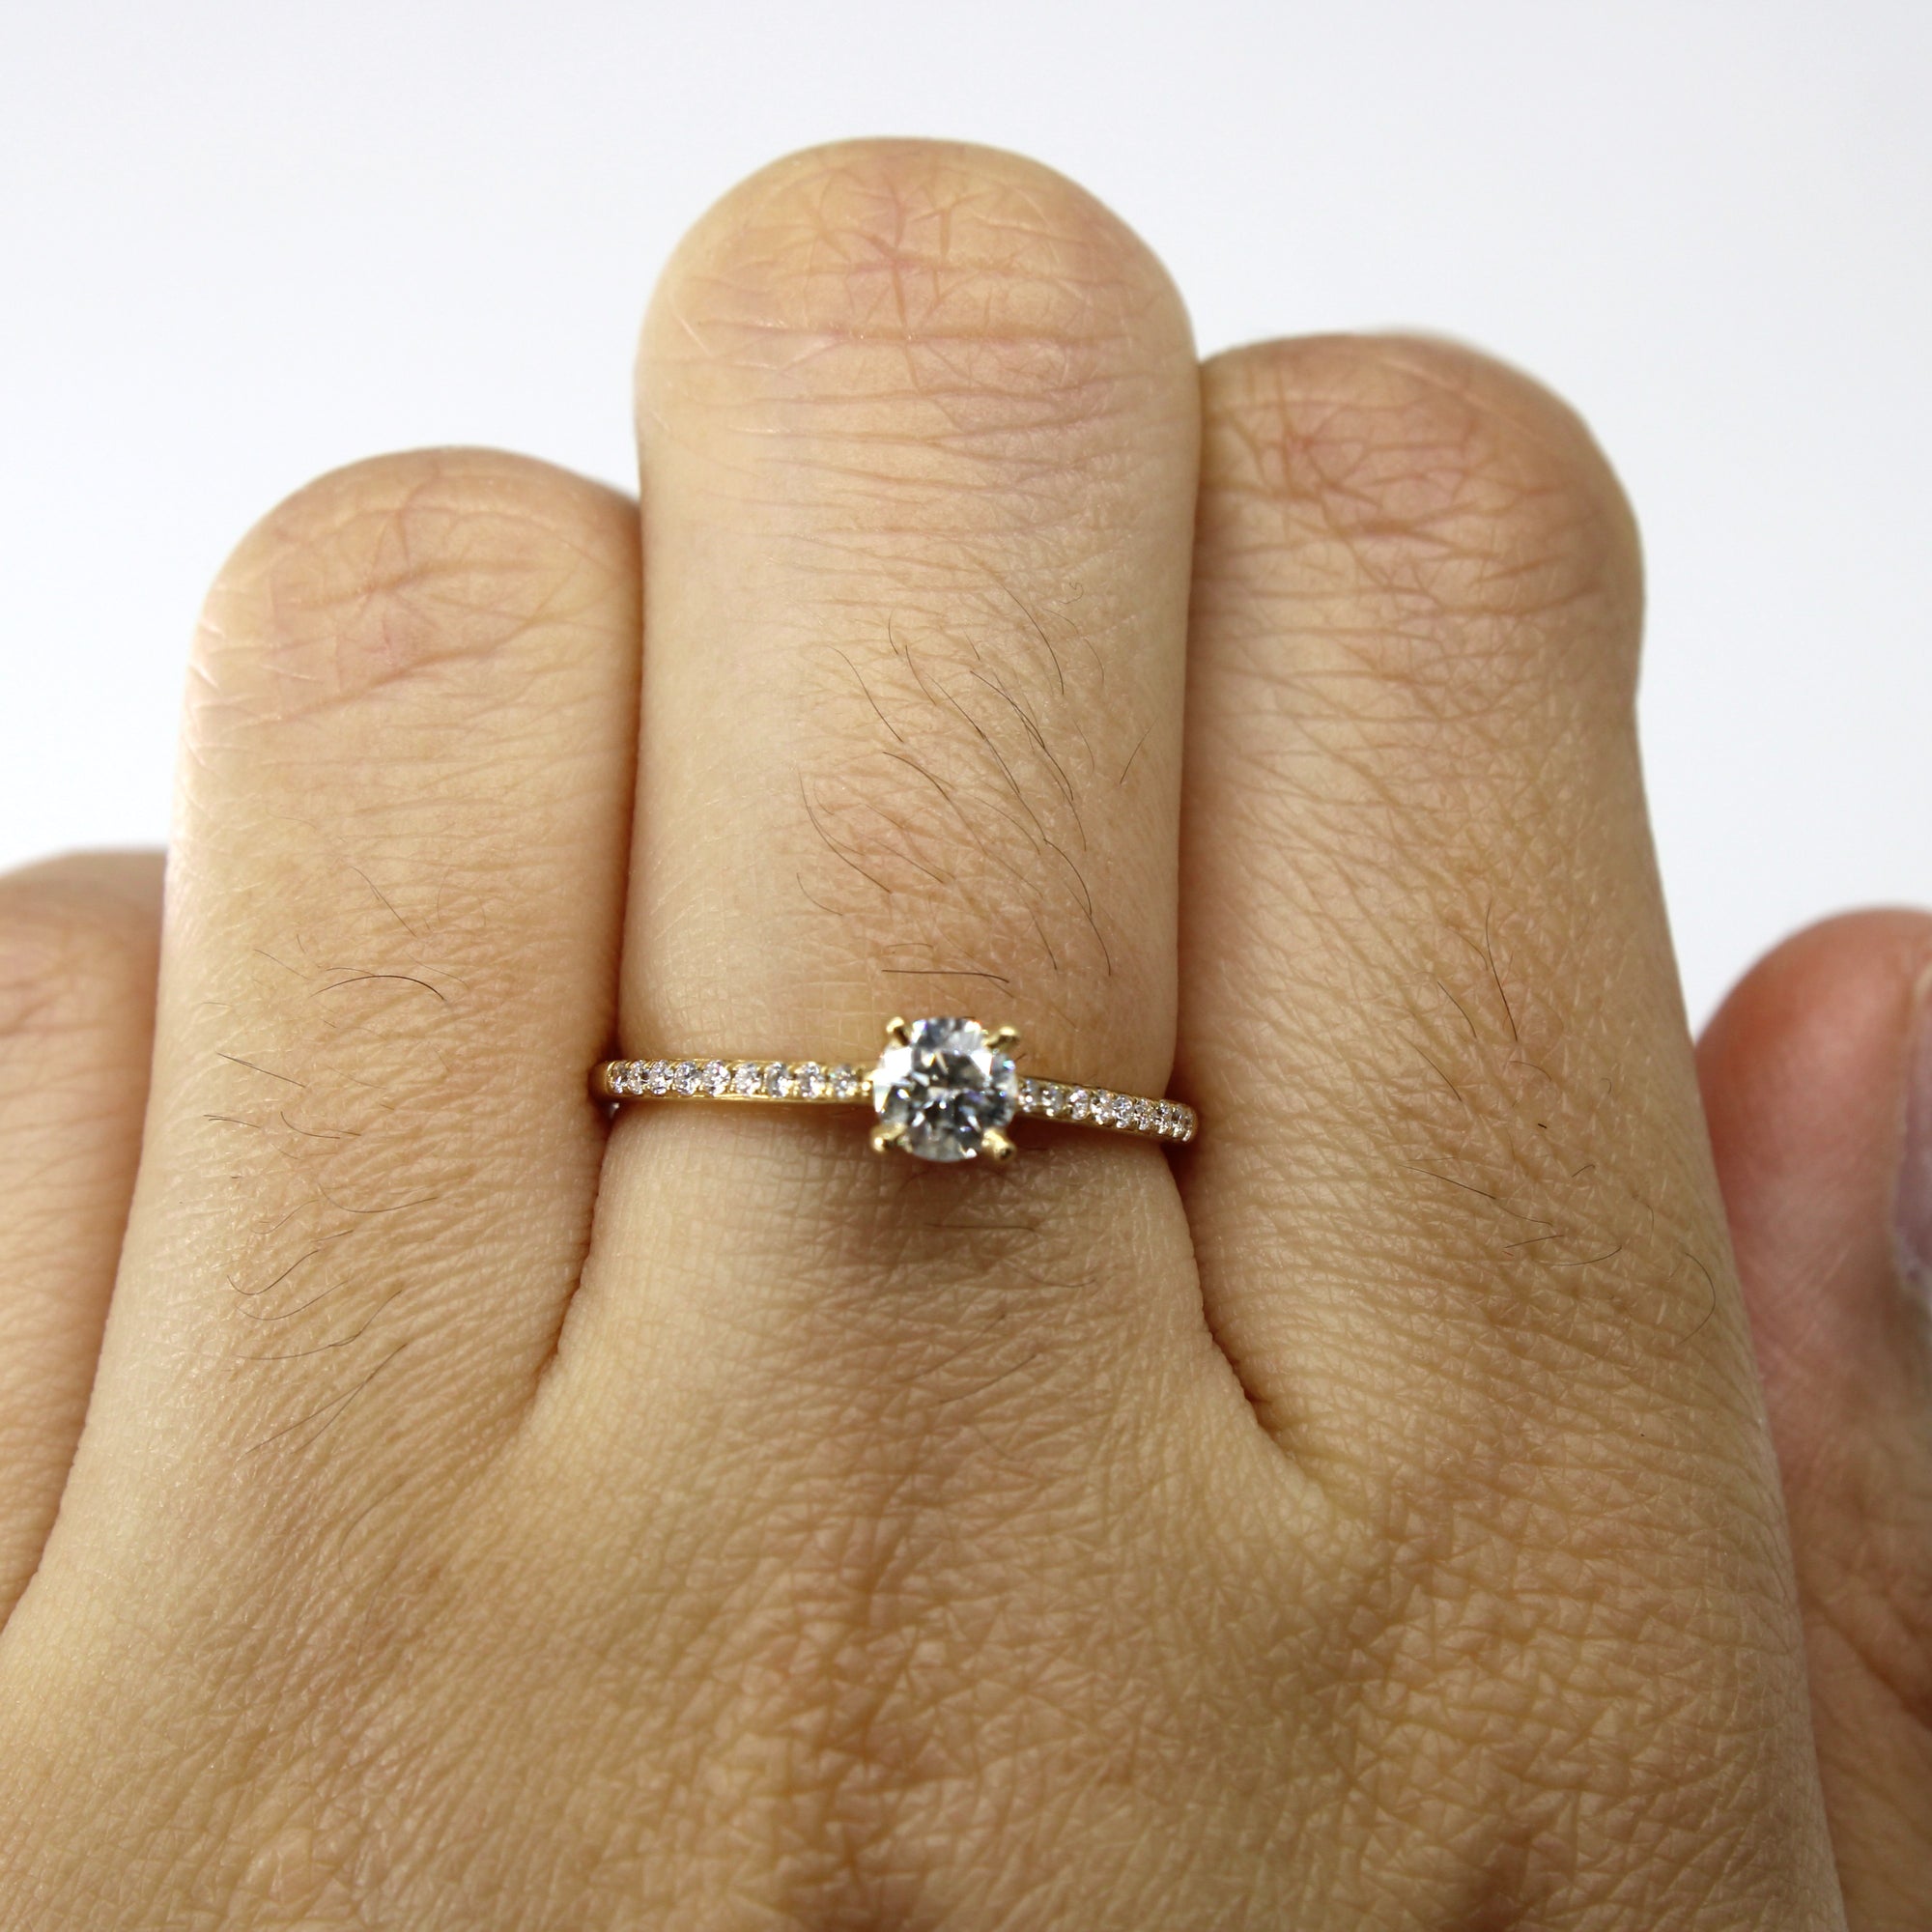 Solitaire with Accents Diamond Ring | 0.39ctw | SZ 6.5 |